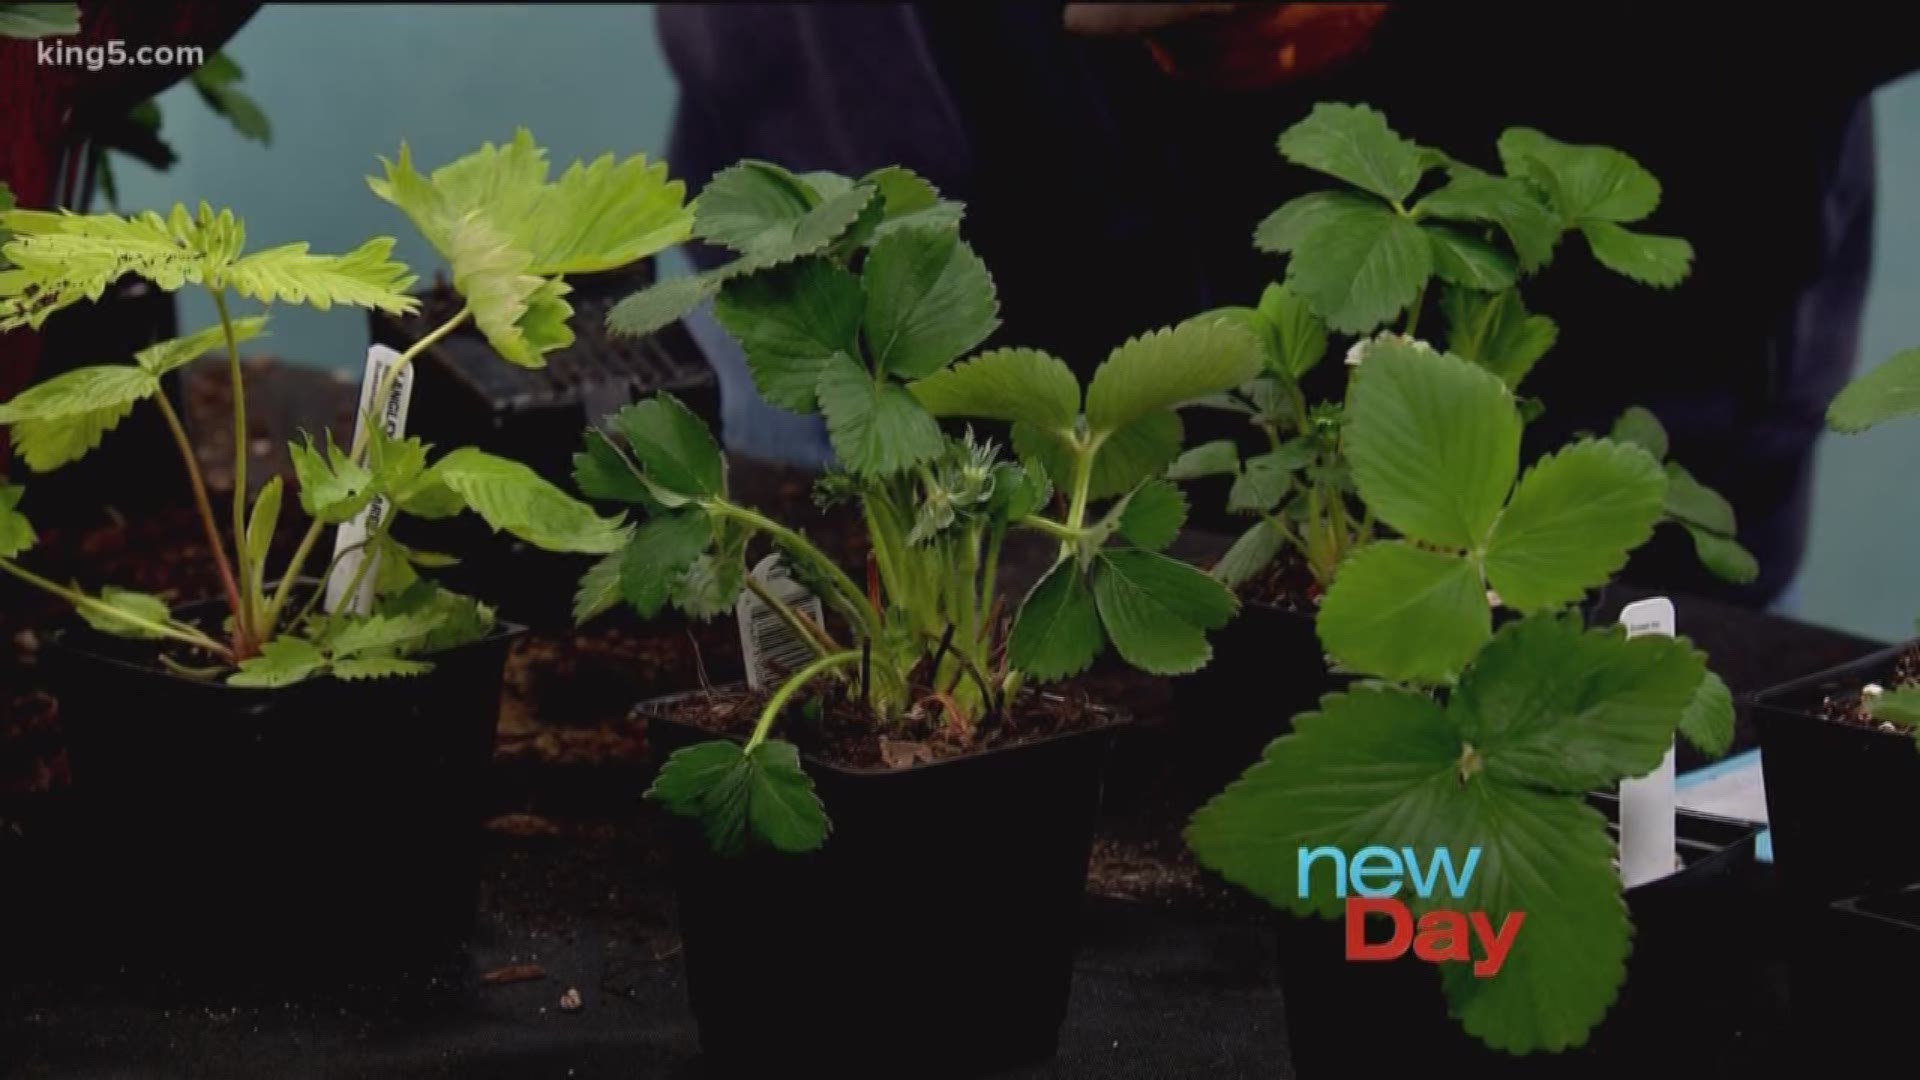 Our favorite gardener Cisco shows us everything you need to know about growing your own strawberries!